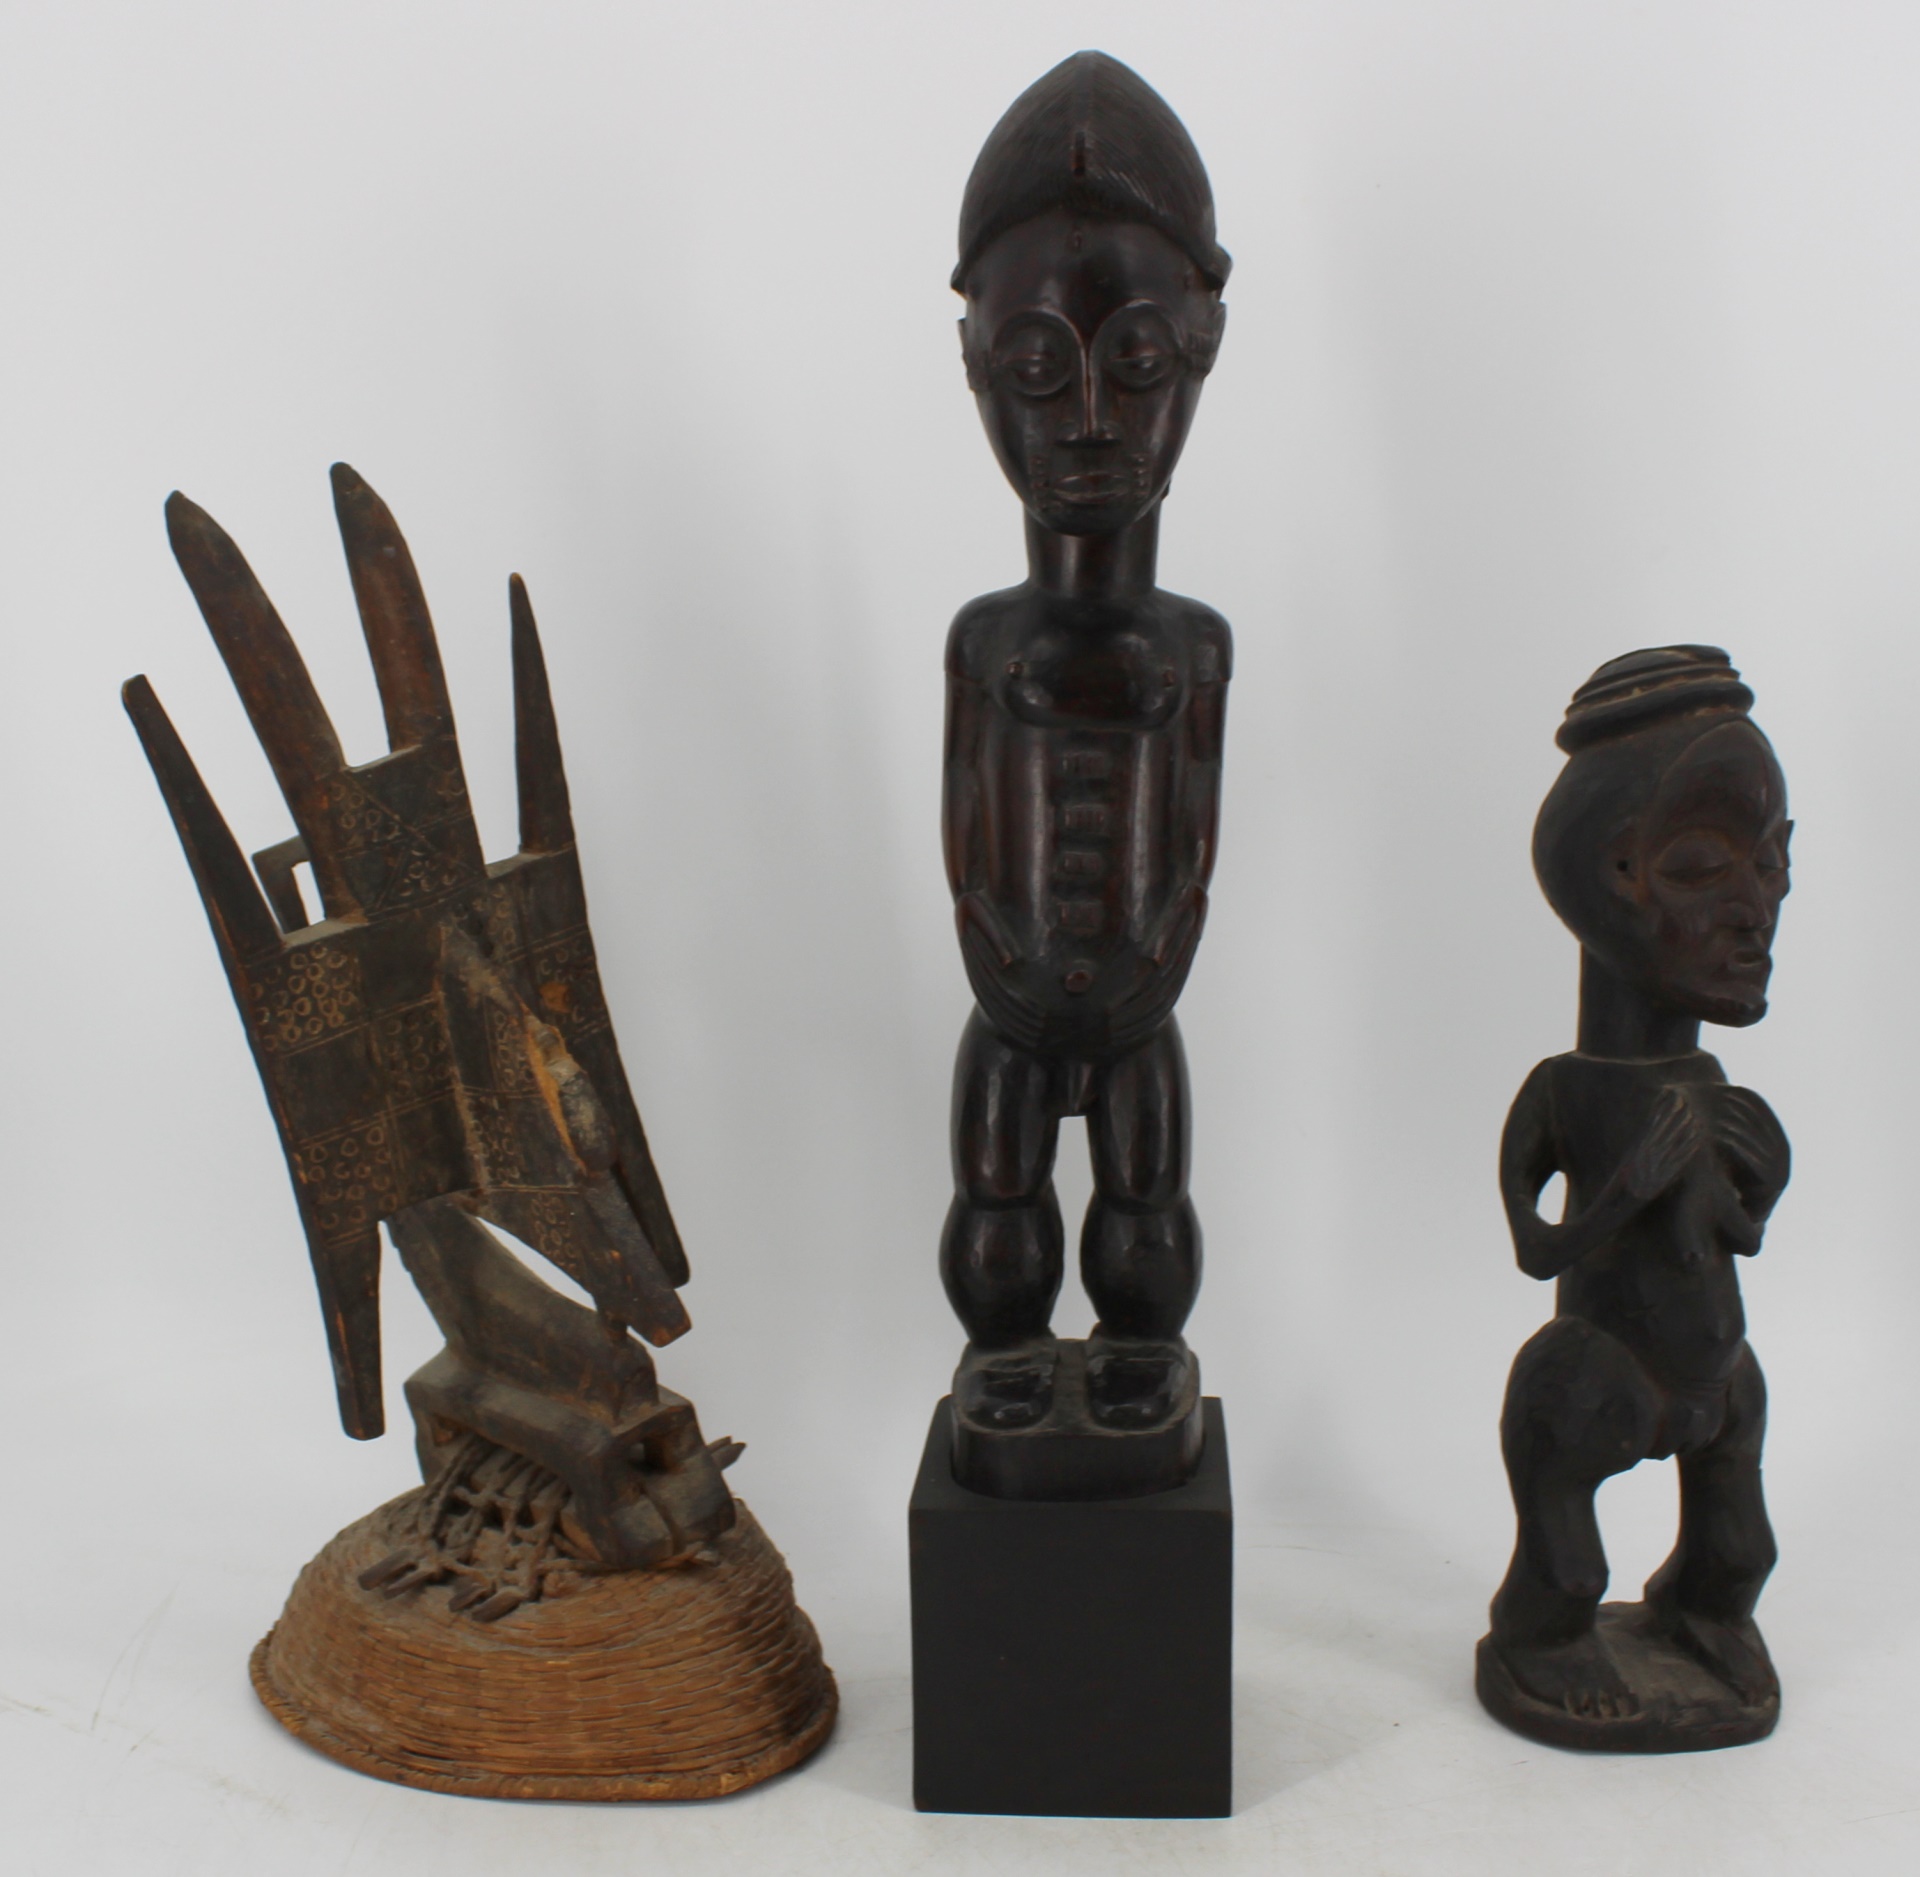 3 ANTIQUE AFRICAN CARVED WOOD FIGURES  3bc68c